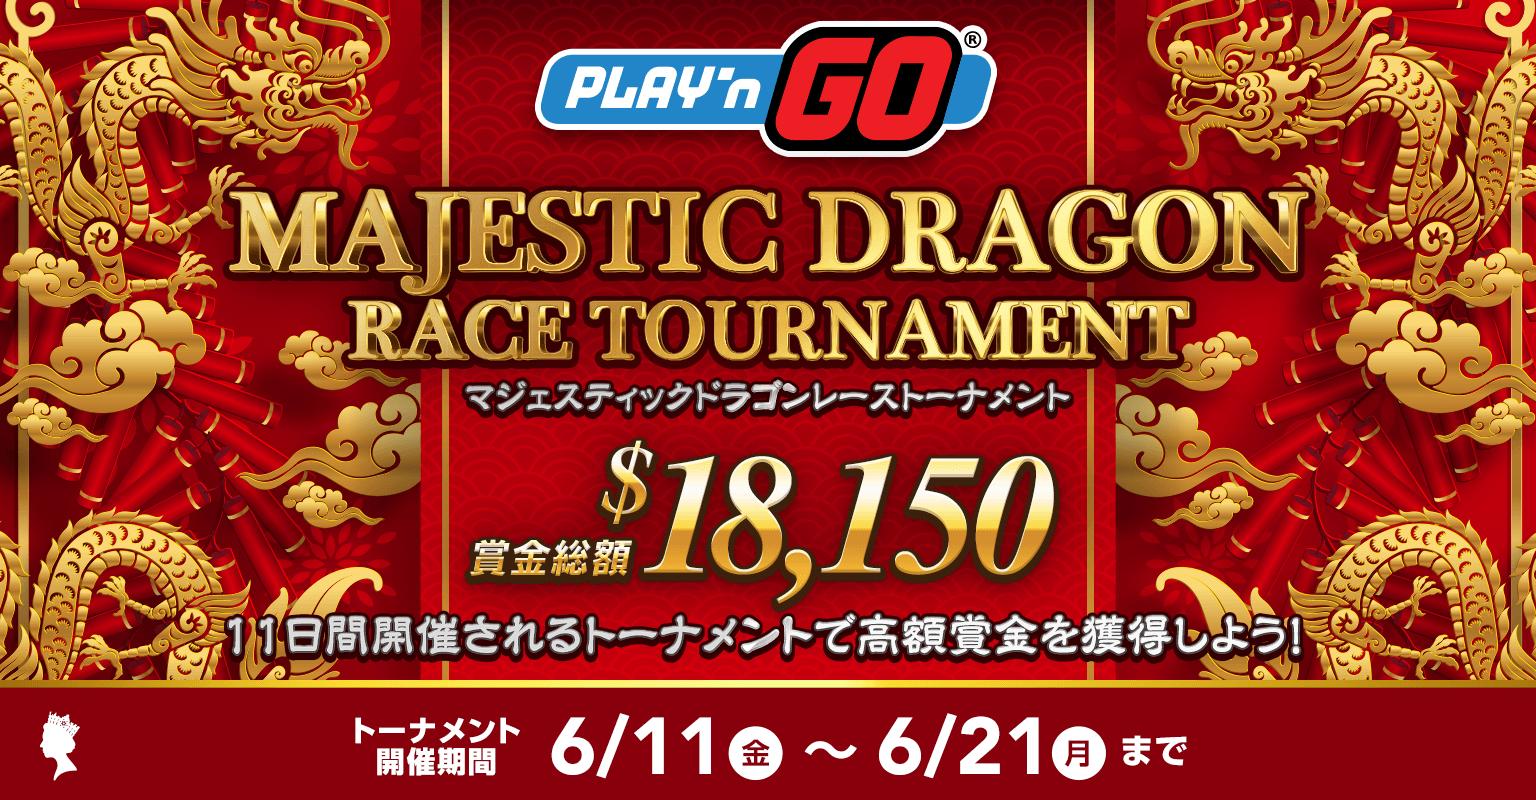 Take part in the 11-day epic tournament with Majestic Dragon Race Slot by Play'n GO. Earn up to $3000 with a total prize pool of $18,150.